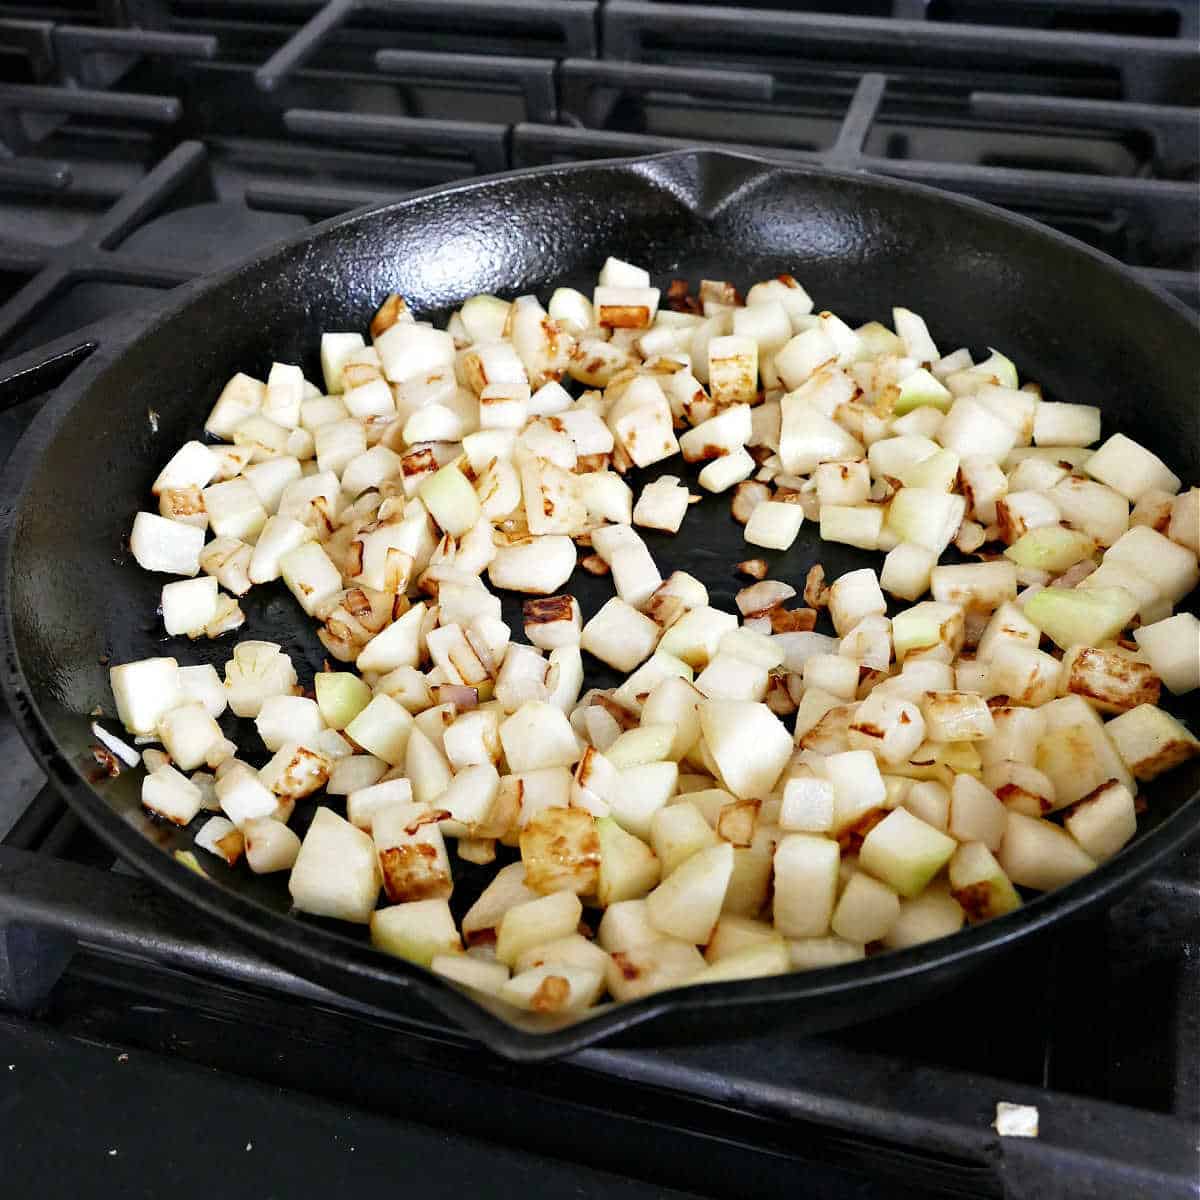 kohlrabi and onion cooking in a cast iron skillet over a stove